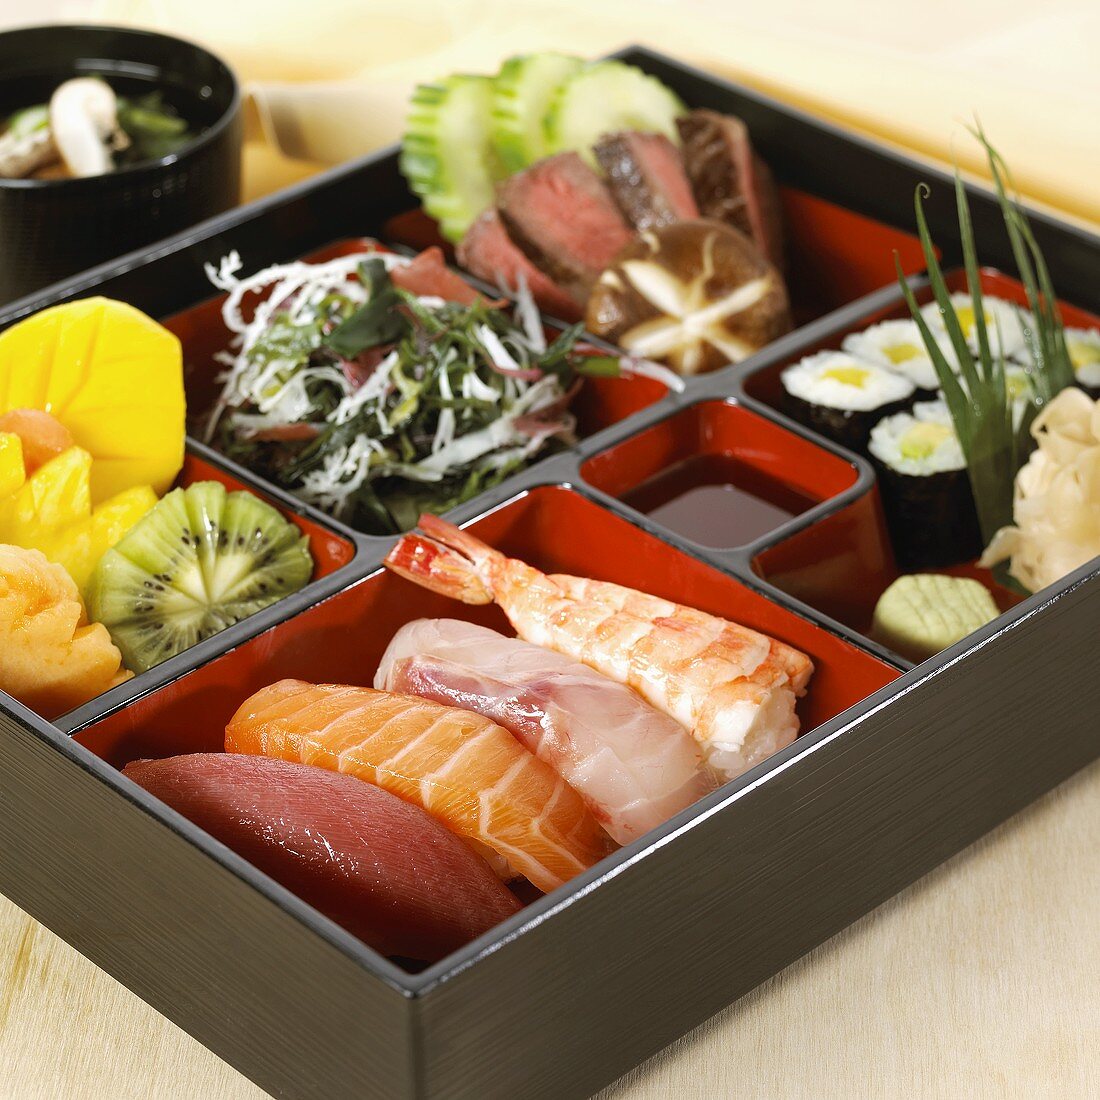 Complete meal in a box (Japan)